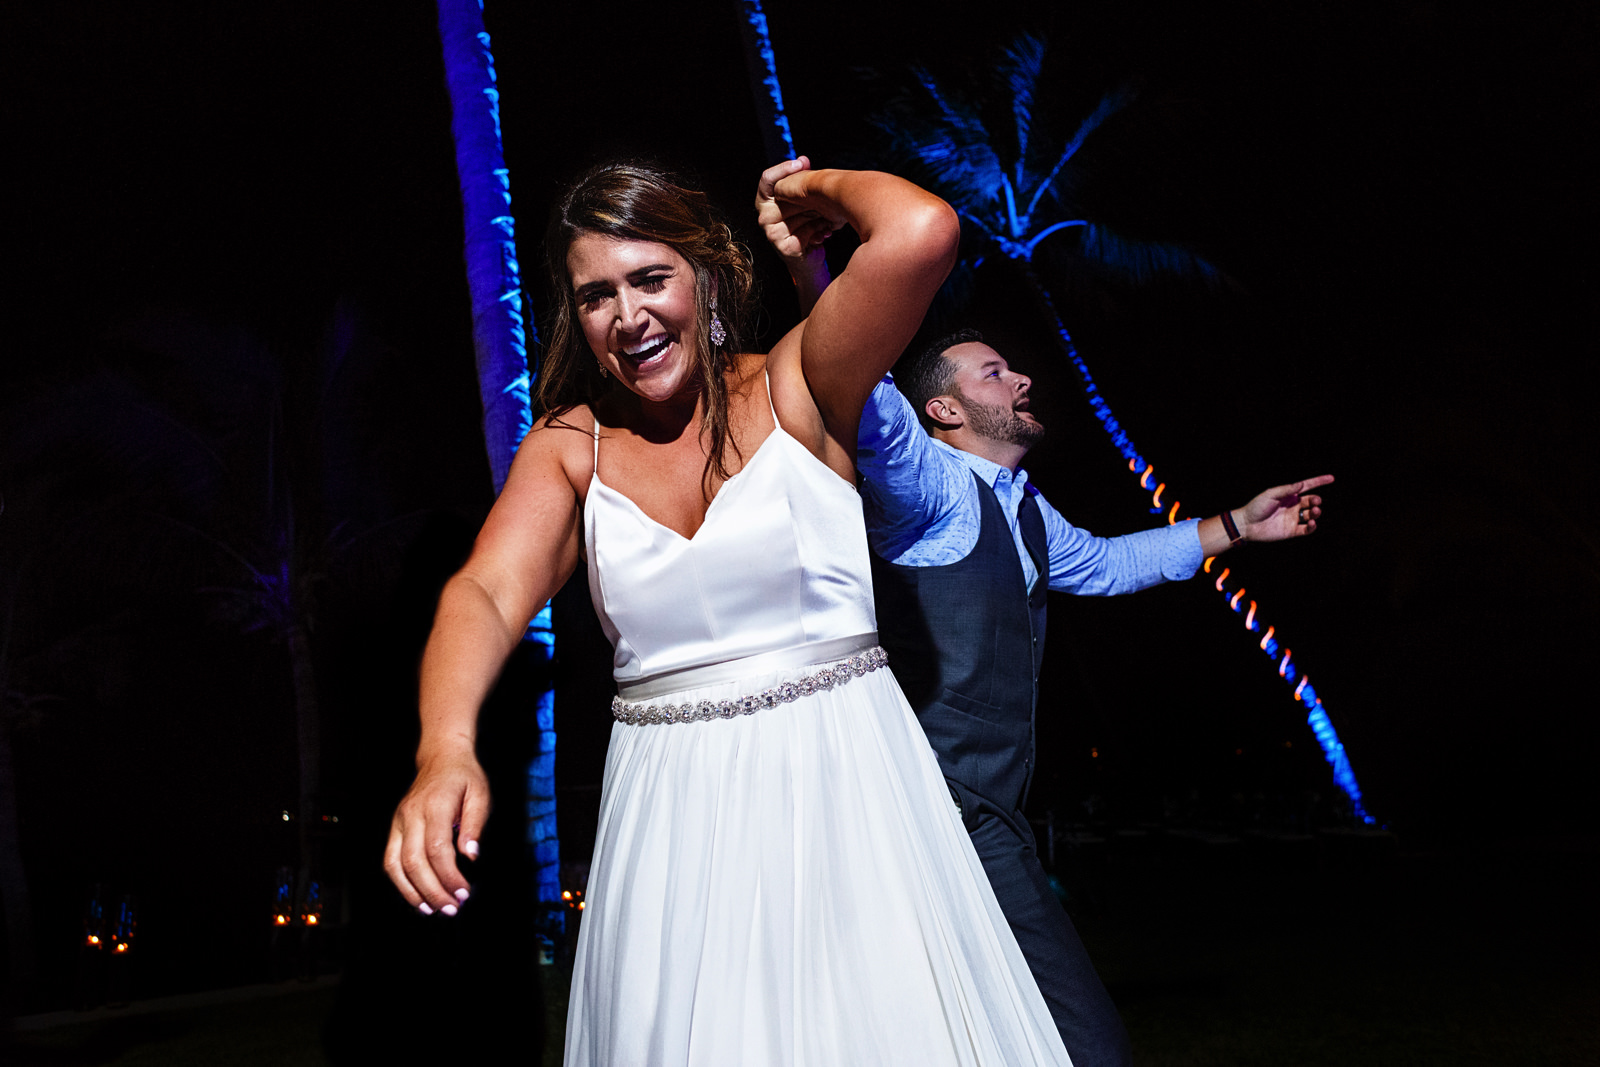 Bride and wedding guest dancing and having fun